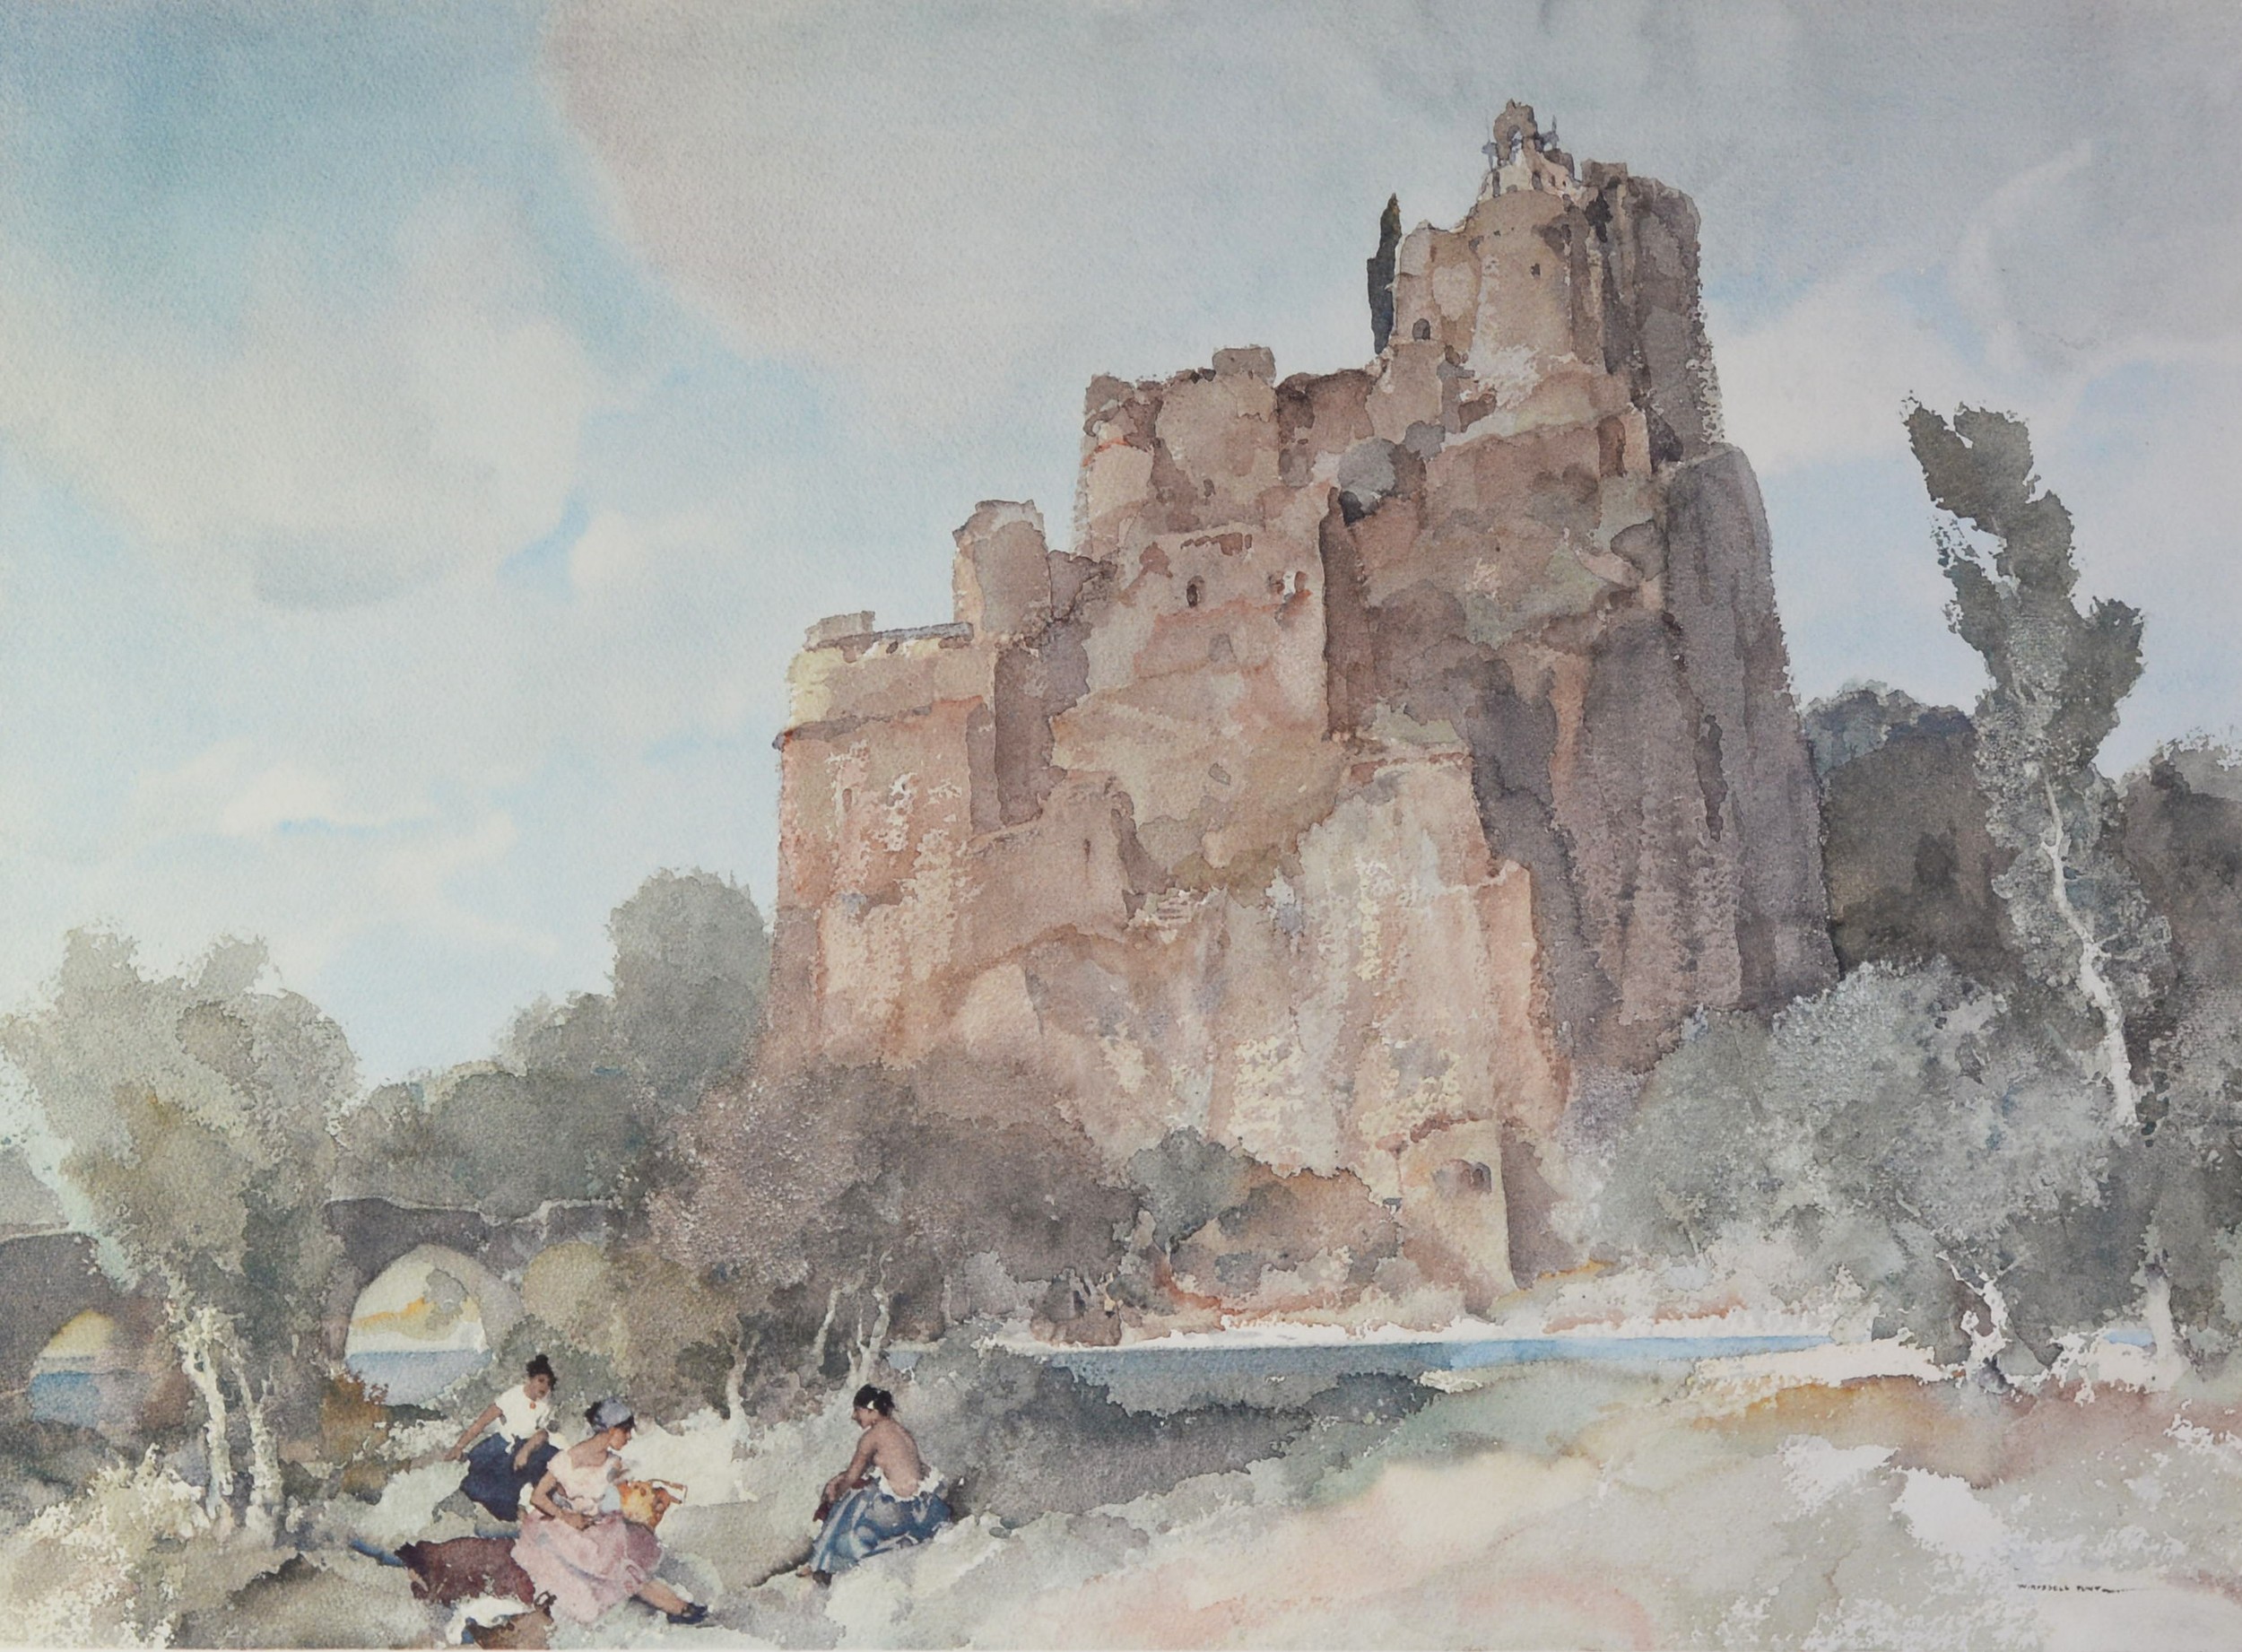 SIR WILLIAM RUSSELL FLINT LIMITED EDITION COLOUR PRINT ‘Picnic at la Roche’, (10/850) 19 ½” x